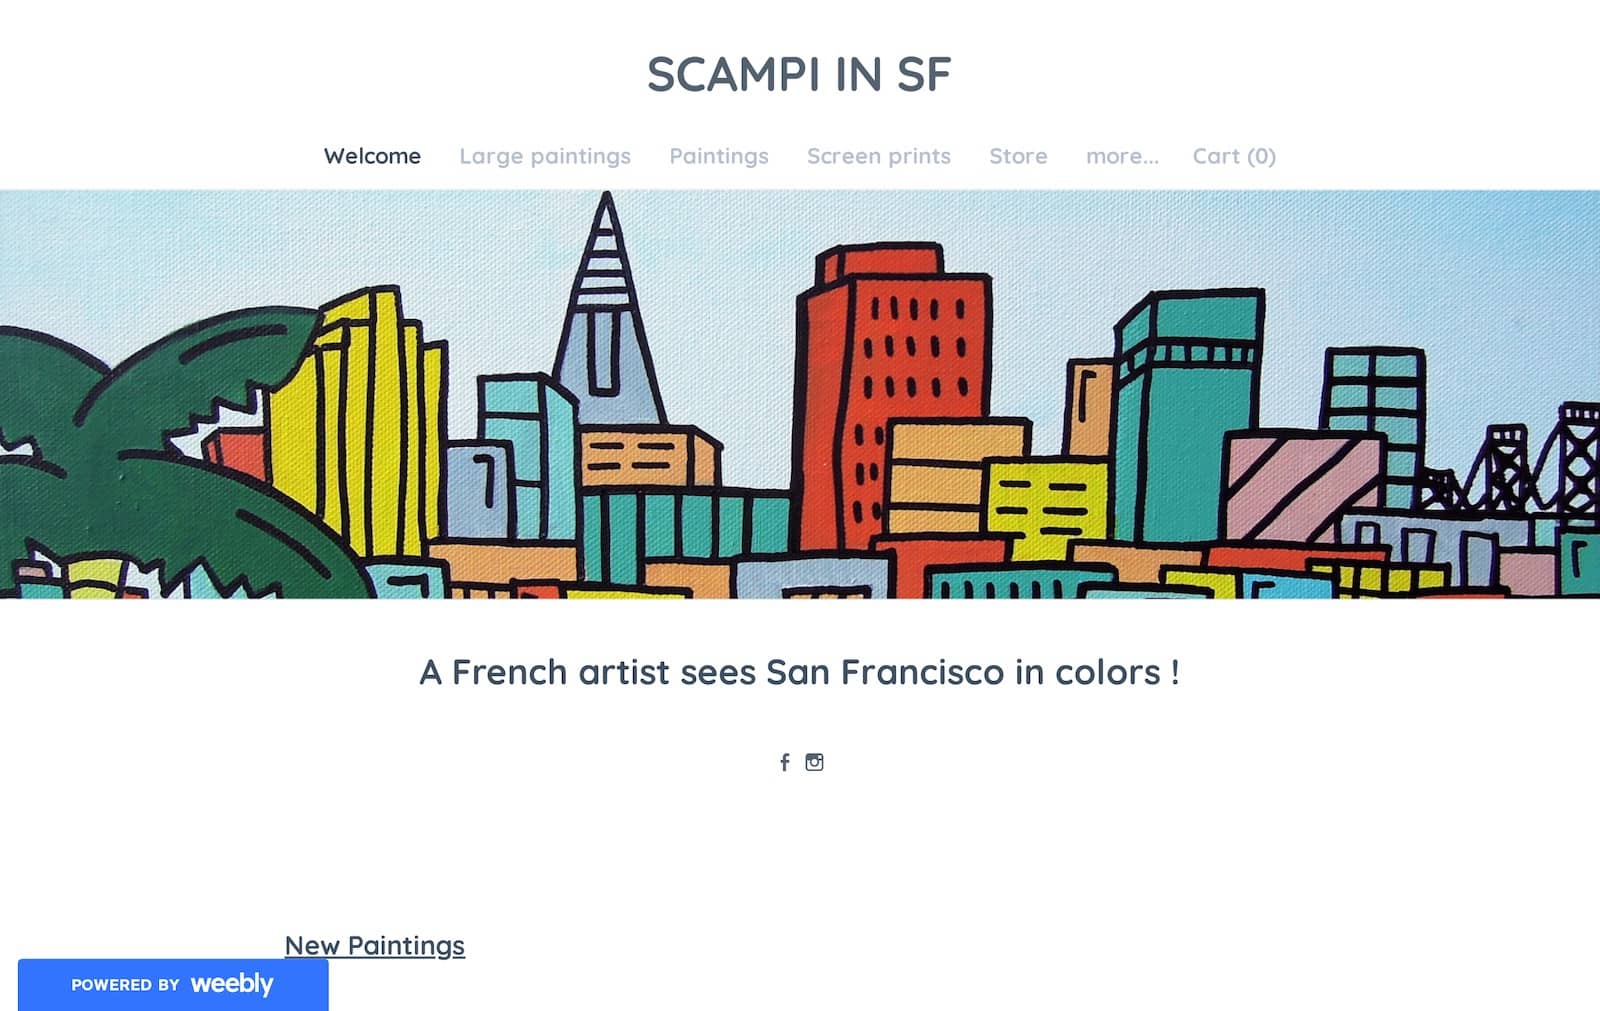 Scampi in SF is an excellent example of an artist using Weebly to create a site.